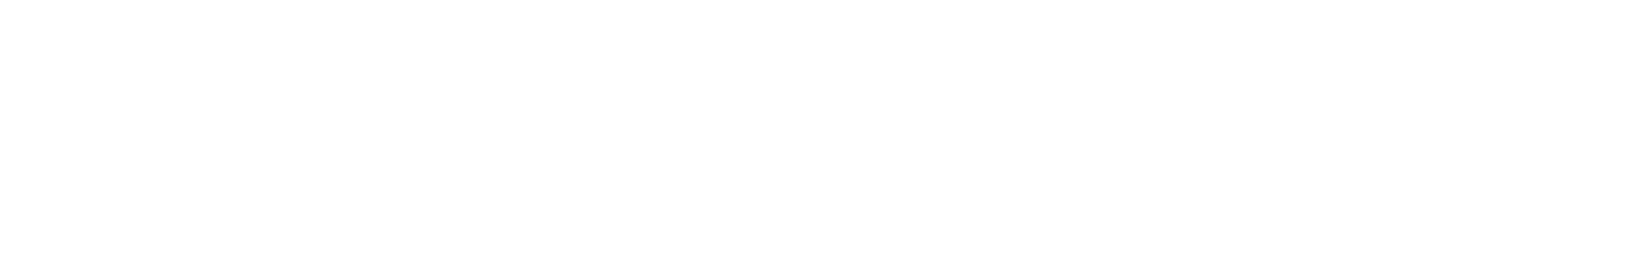 a great deal more logo